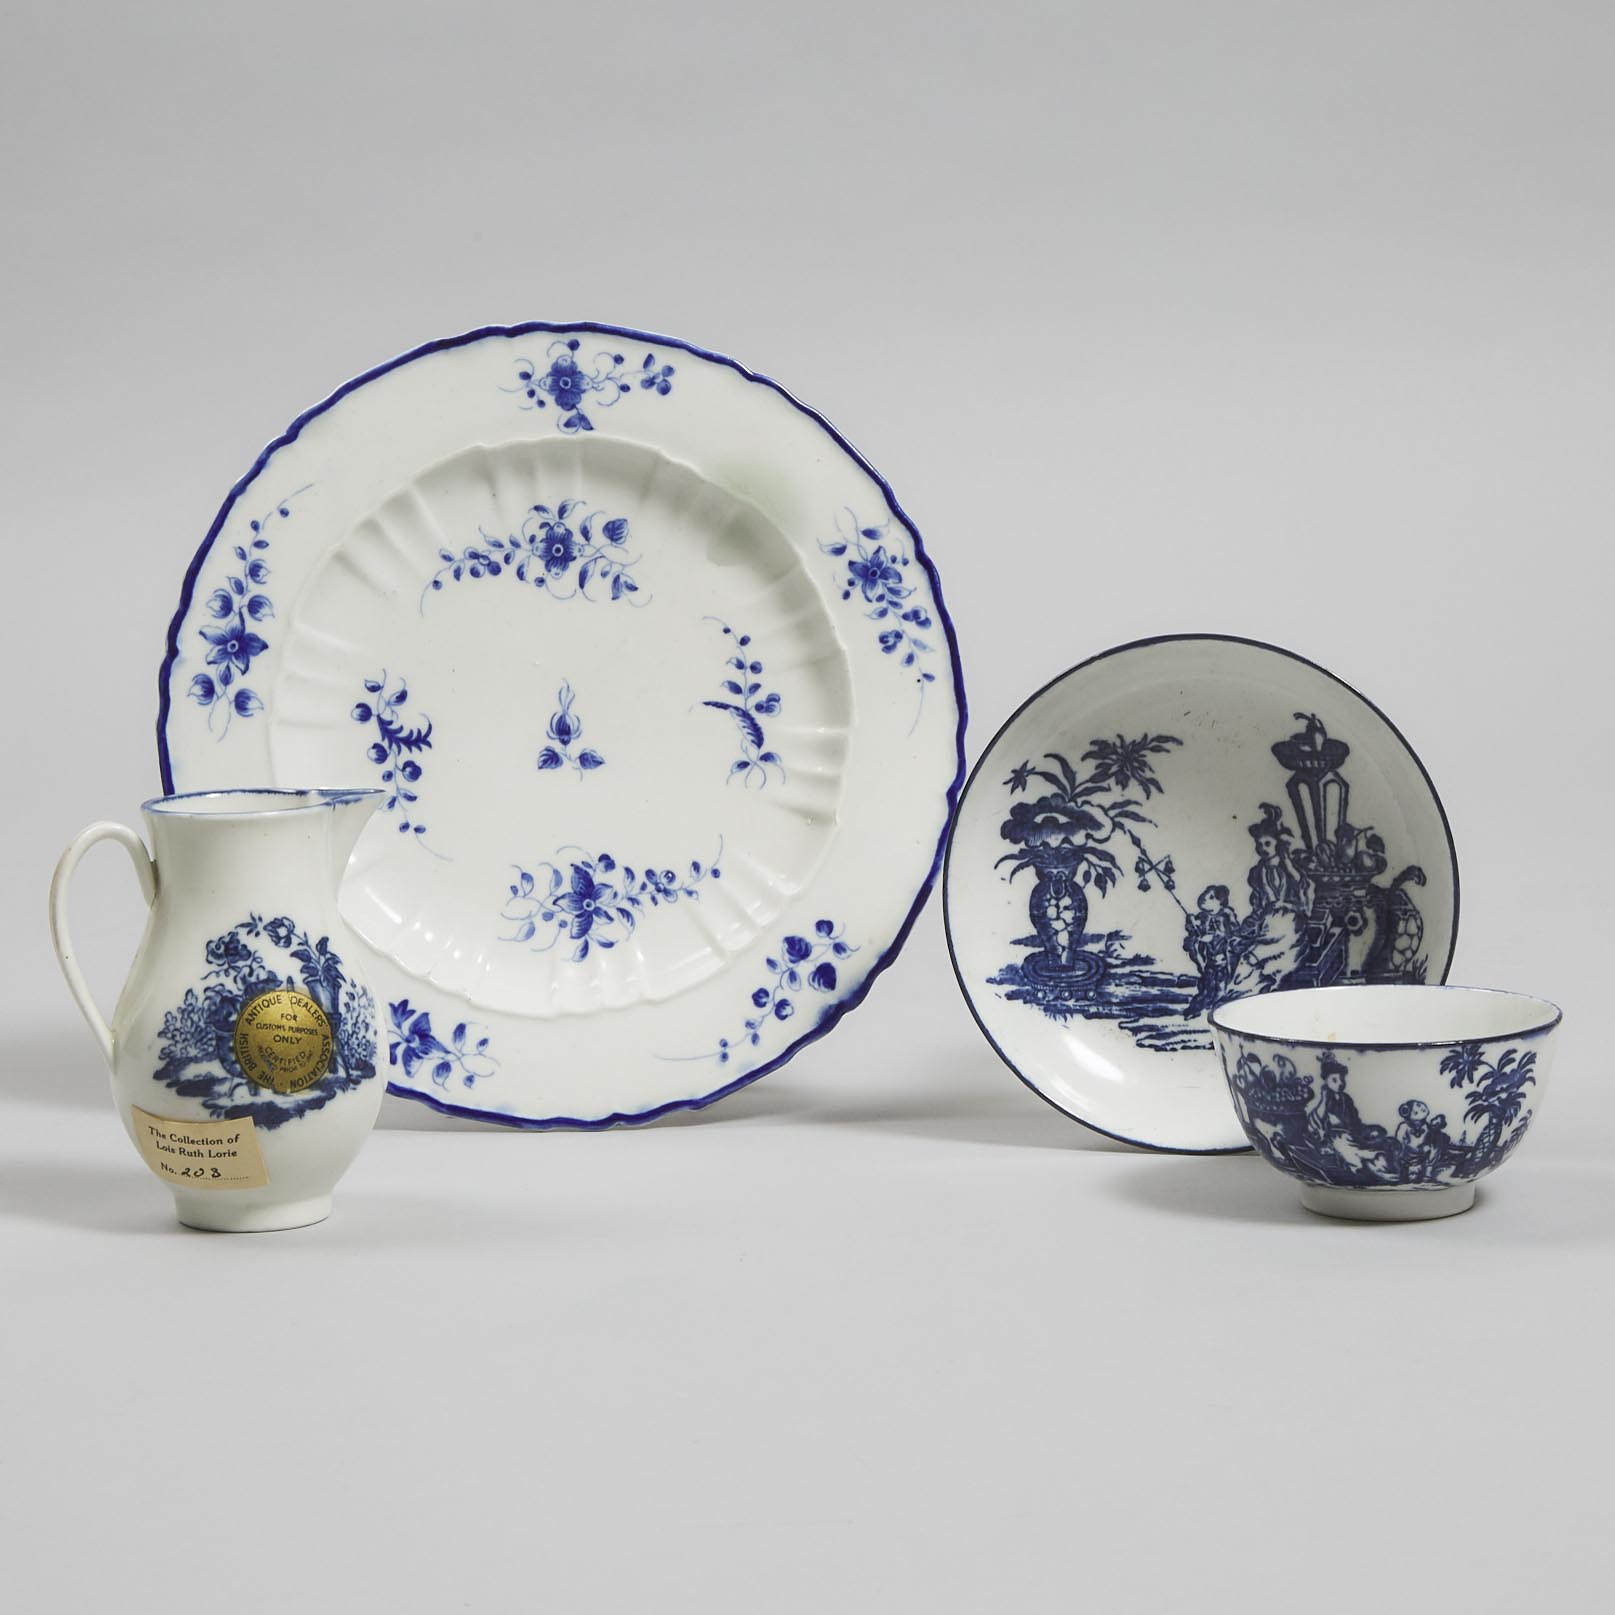 Caughley Blue Printed 'Mother and Child' Cream Jug and a Tea Bowl and Saucer, and a Painted 'Chantilly Sprig' Pattern Plate, c.1780-85